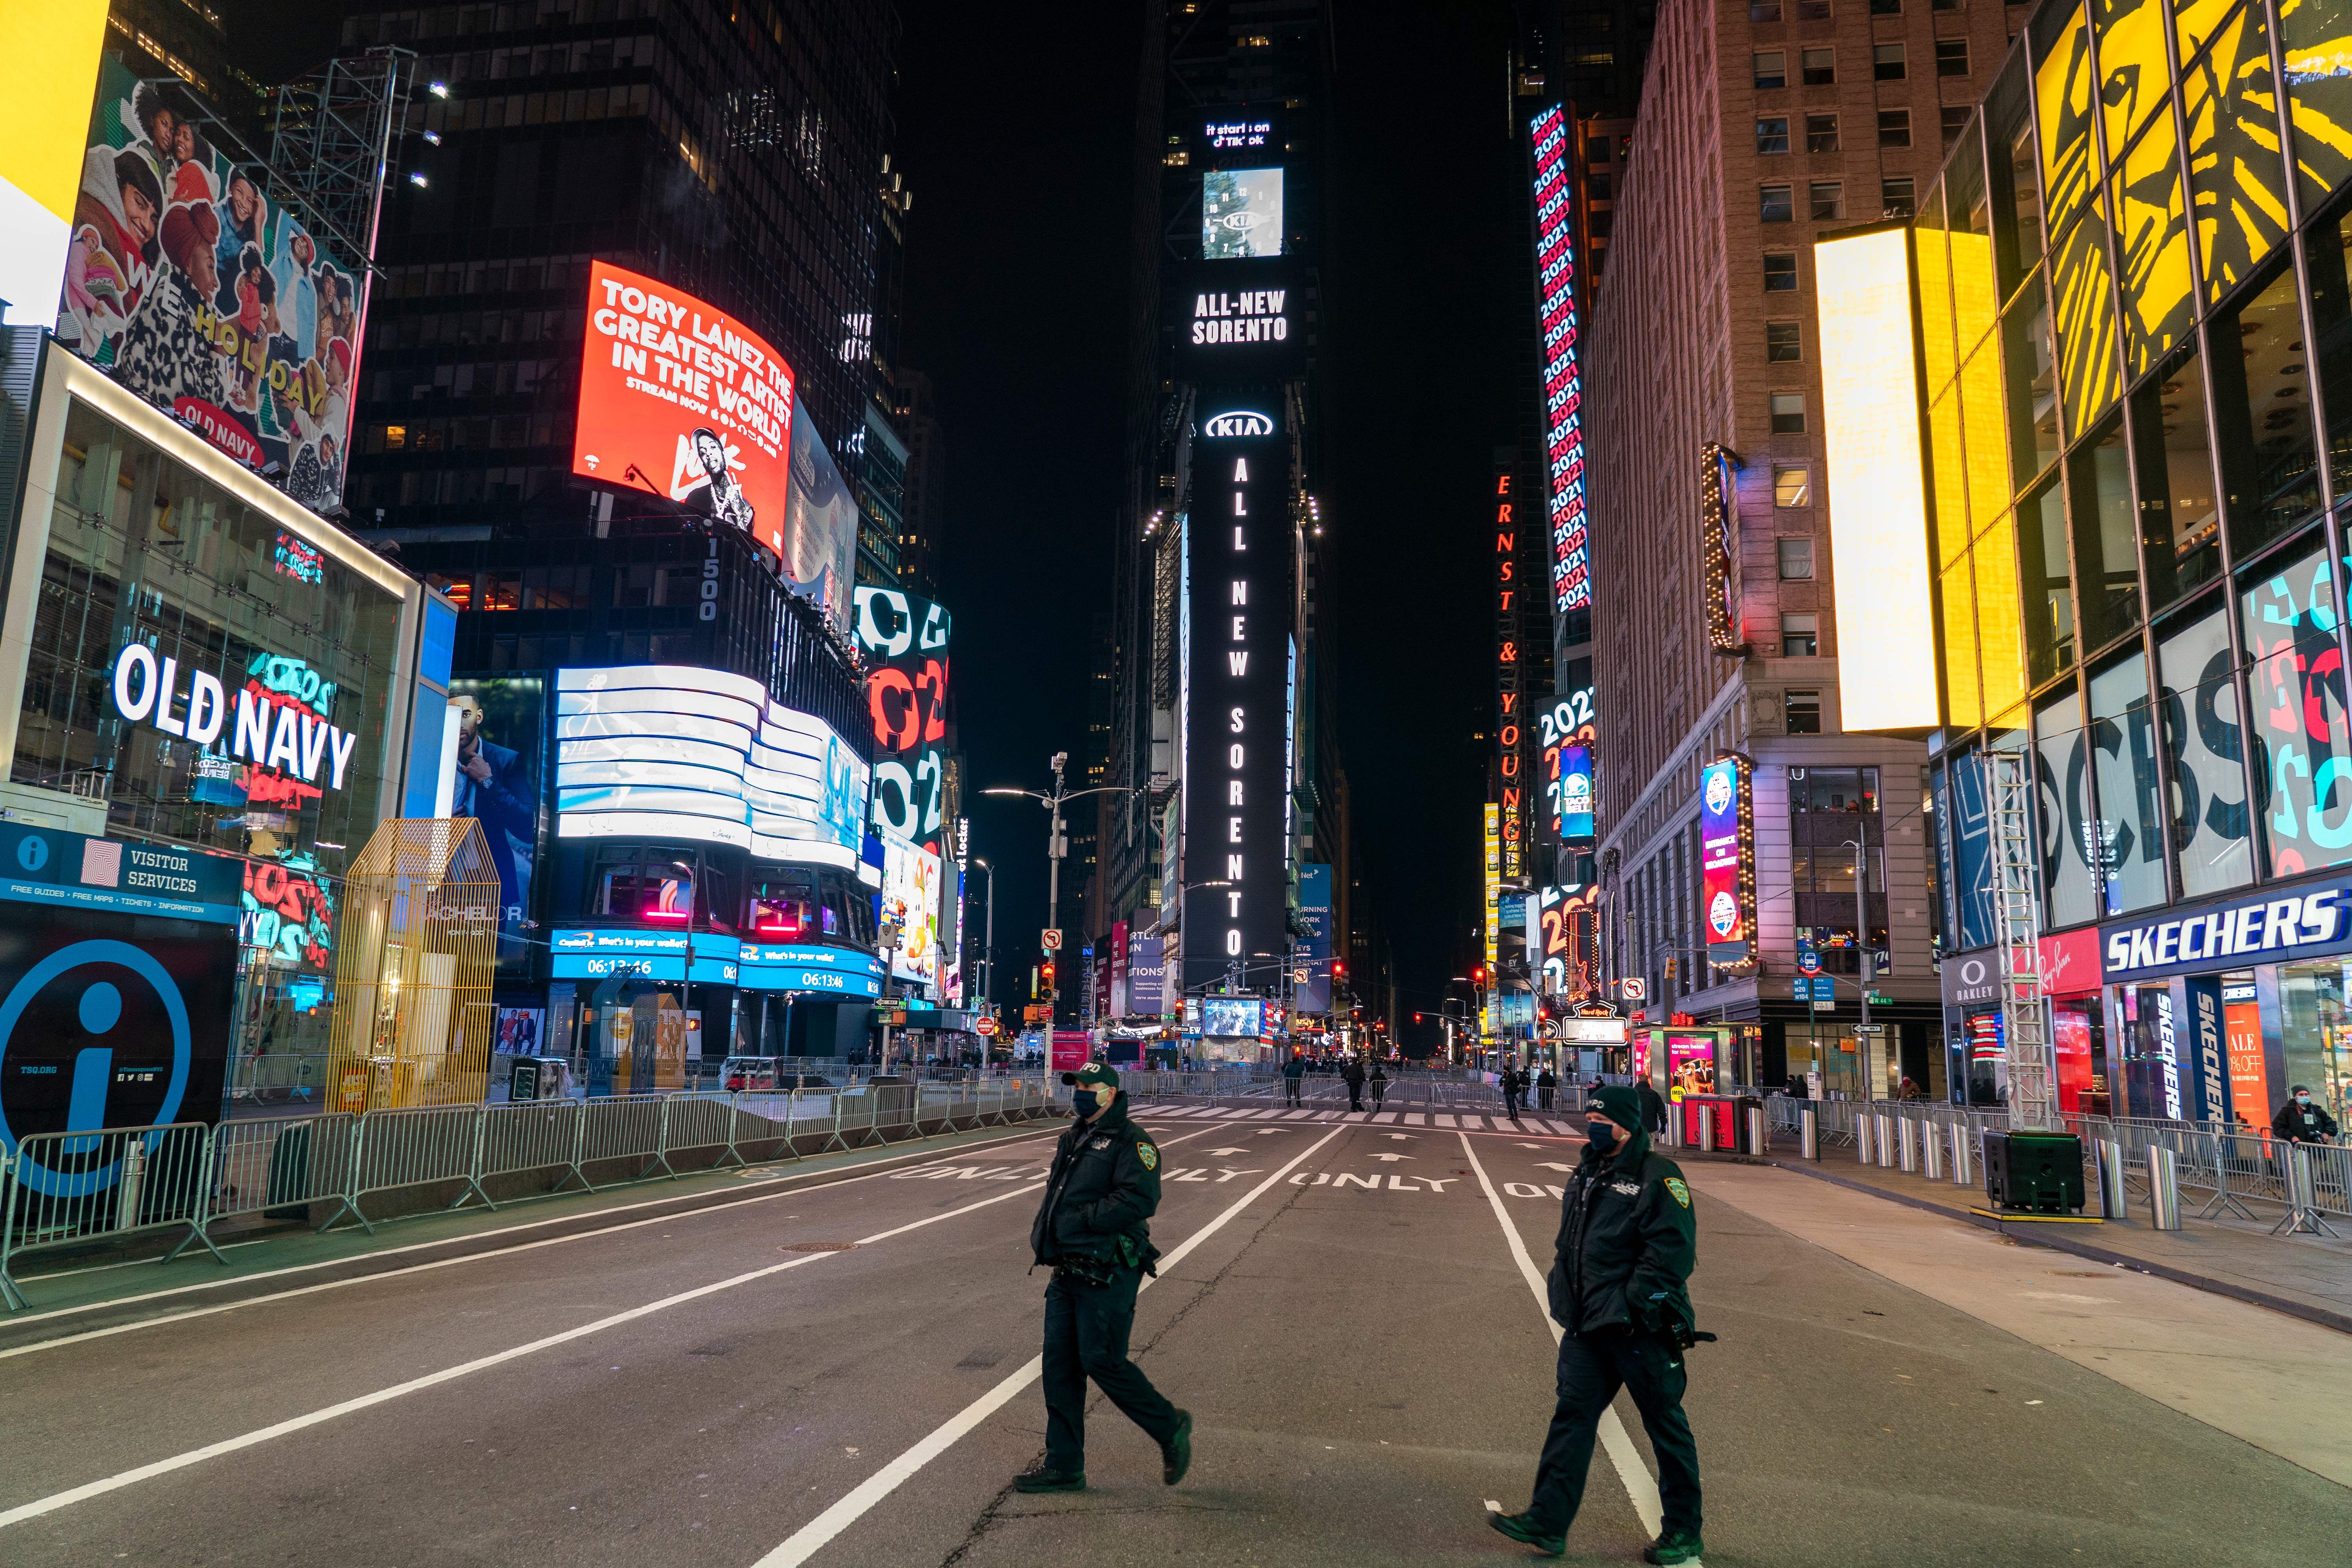 Police officers walk in a nearly empty Times Square due to Covid-19 restrictions on New Year's Eve in New York City, December 31, 2020.